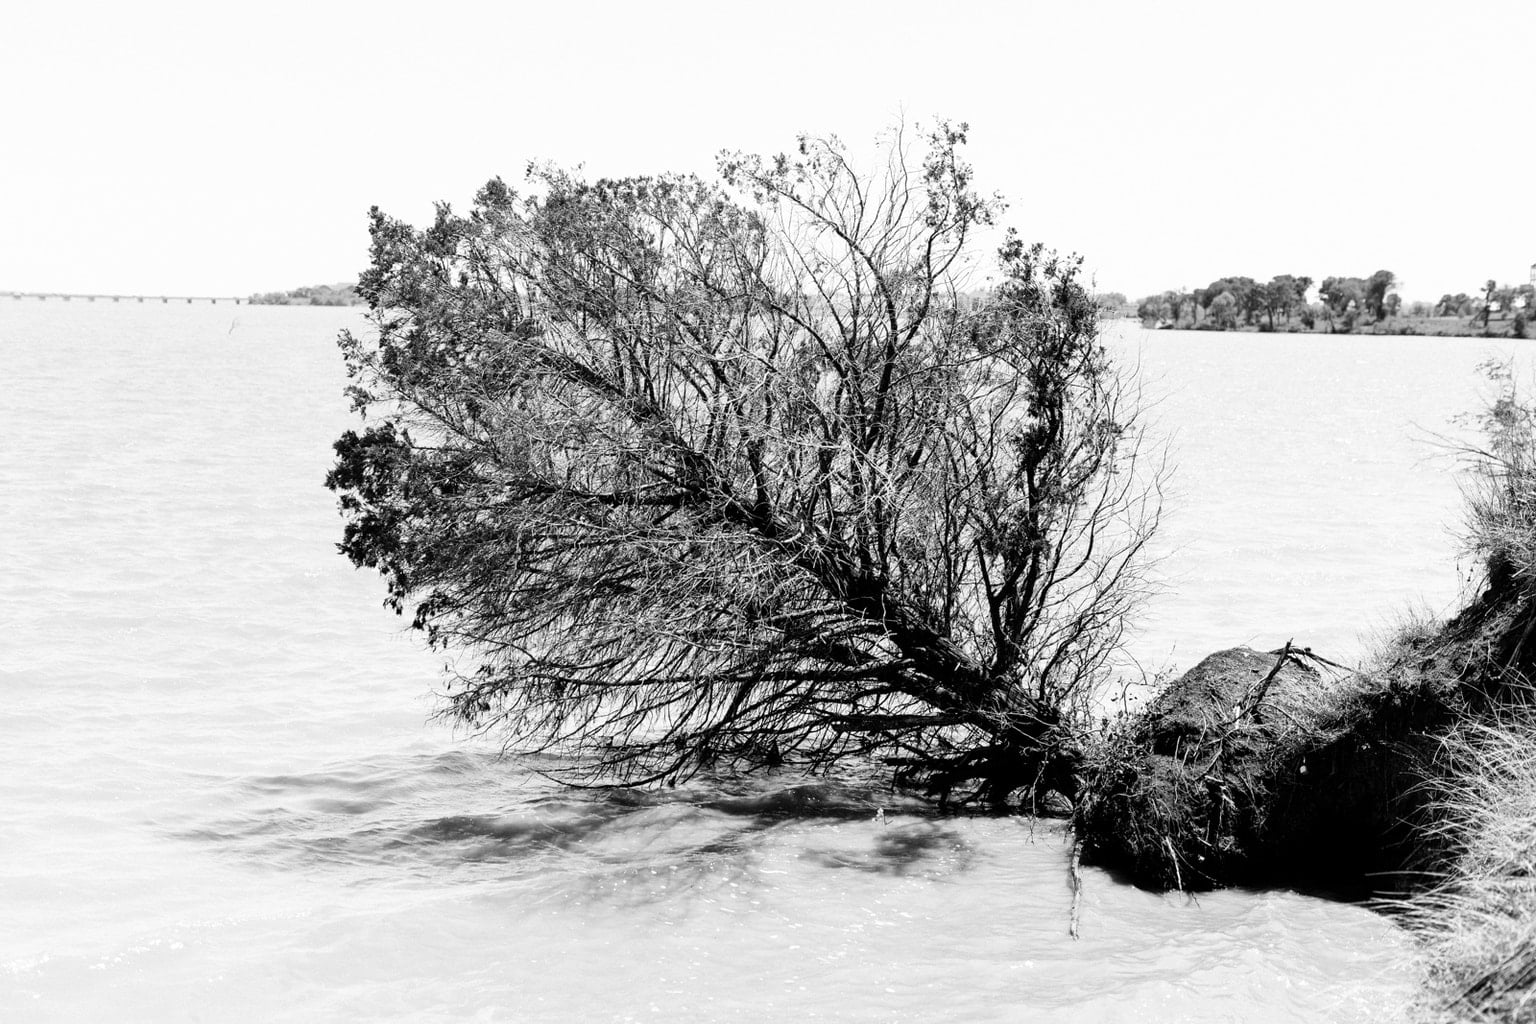 2021 Best Photos: A tree that has fallen down into the lake